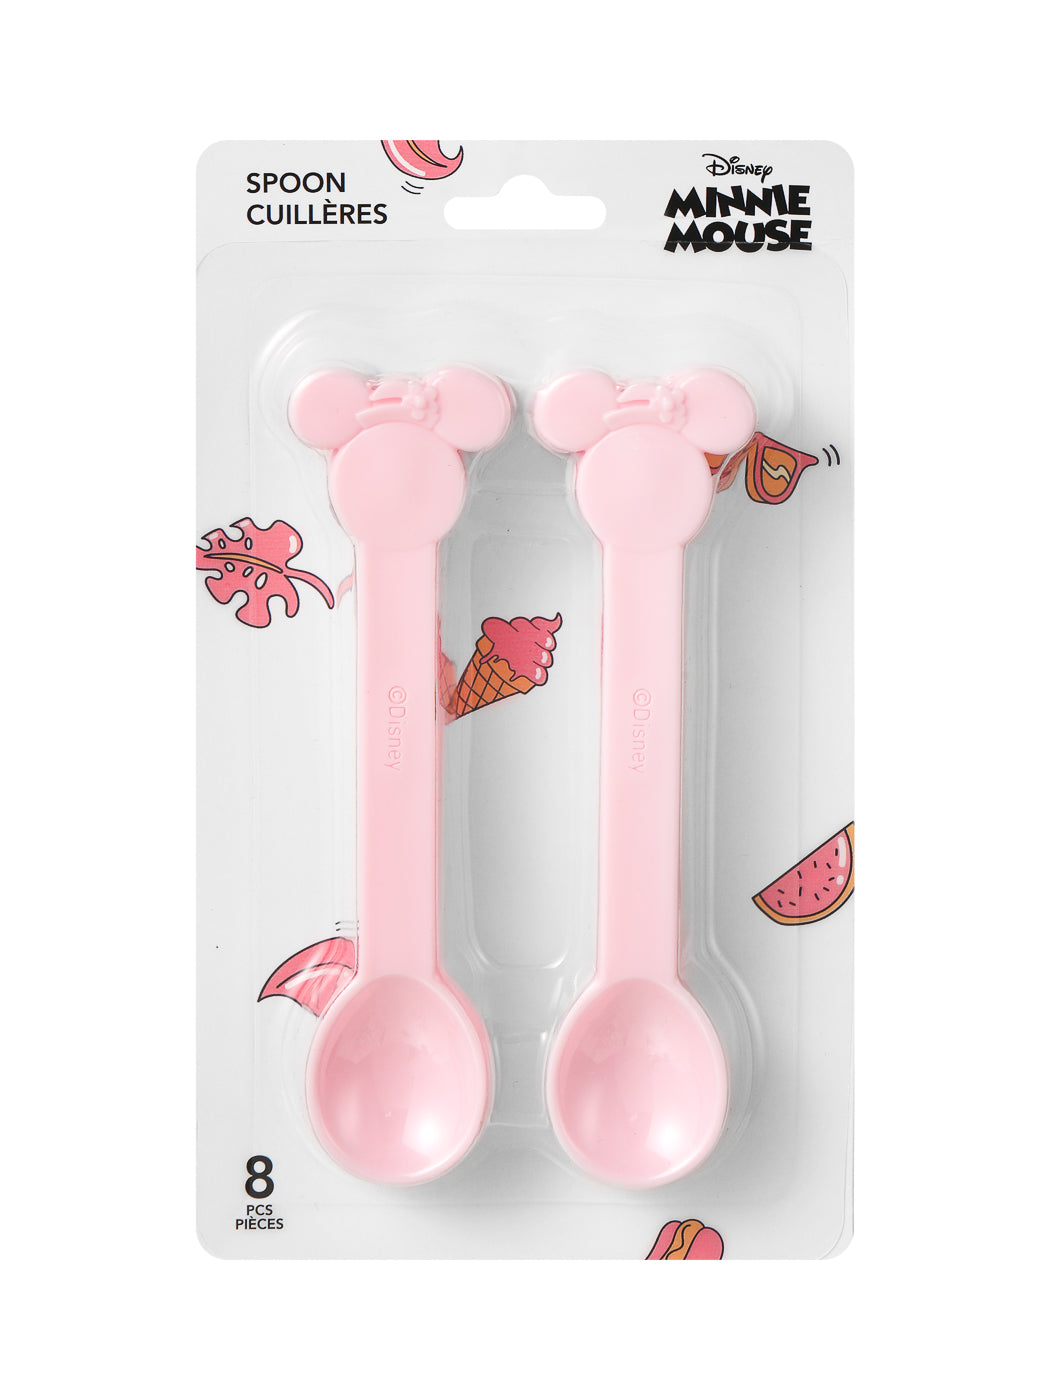 MINISO MICKEY MOUSE COLLECTION 2.0 SPOON 8PCS(MINNIE MOUSE) 2010538211104 CUTLERY SET-5